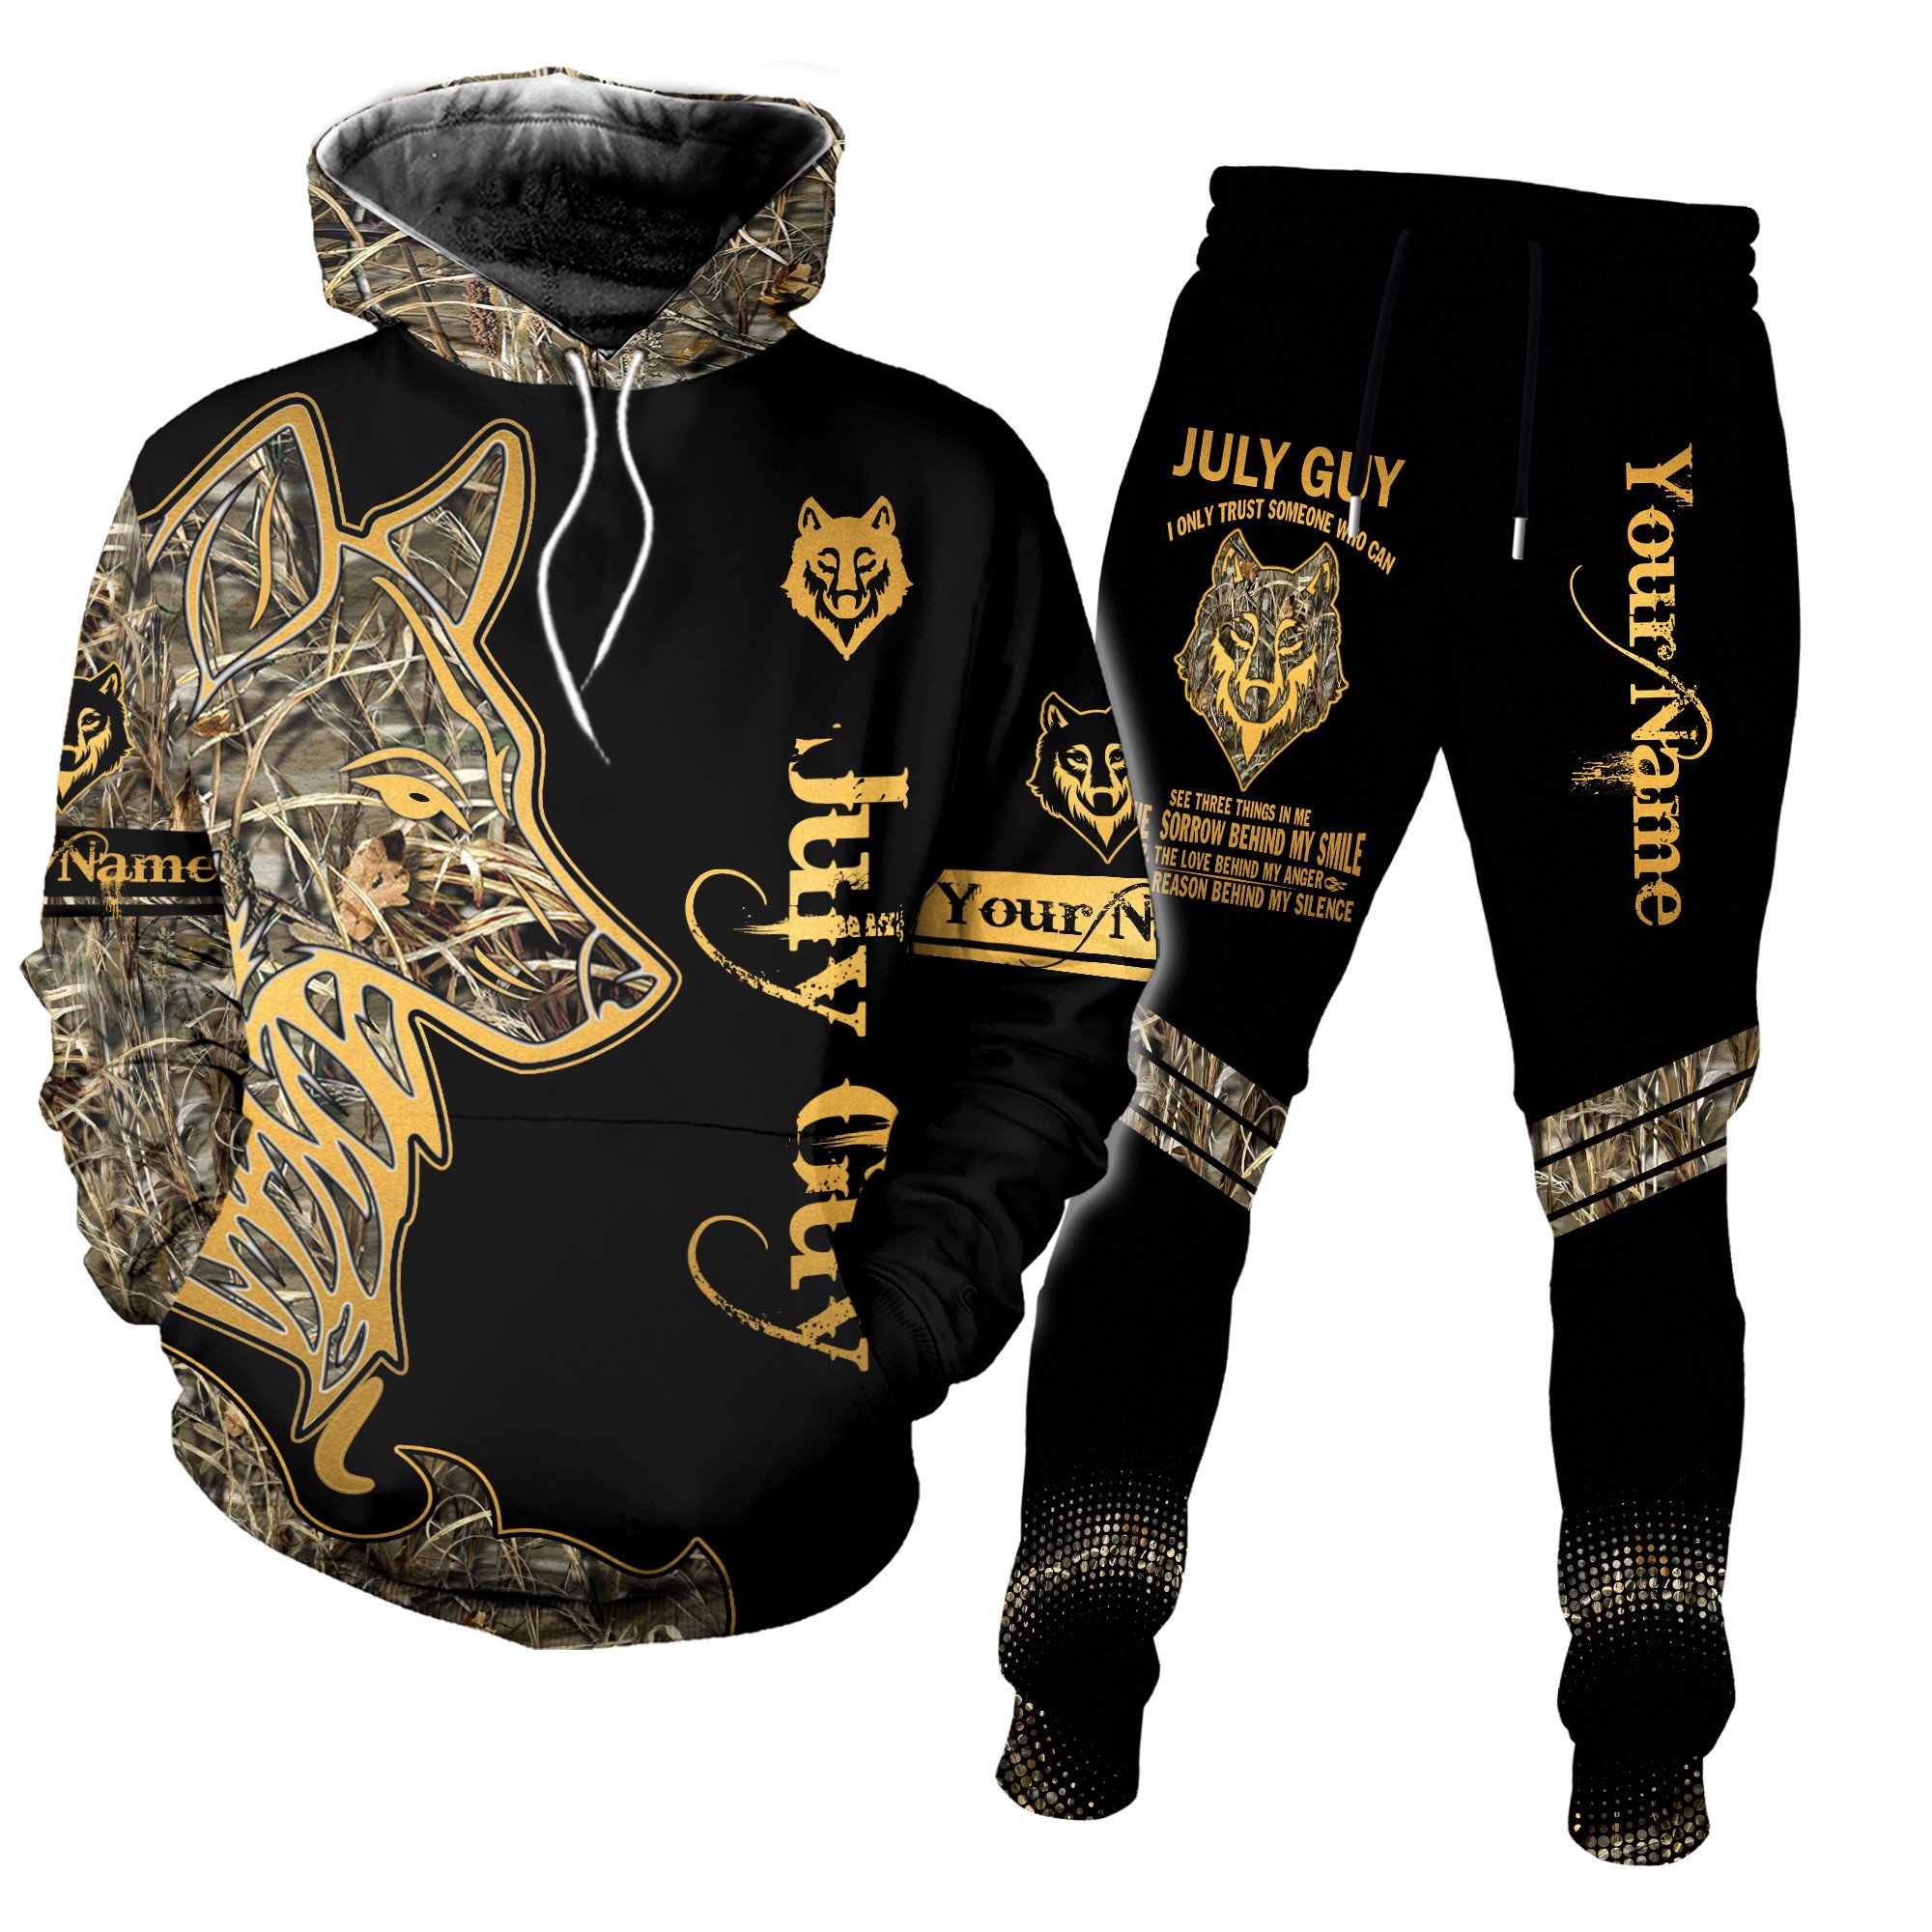 July Guy Some One Who Can The Sorrow Behind Smile Wolf Personalized Hoodie And Long Pants Set